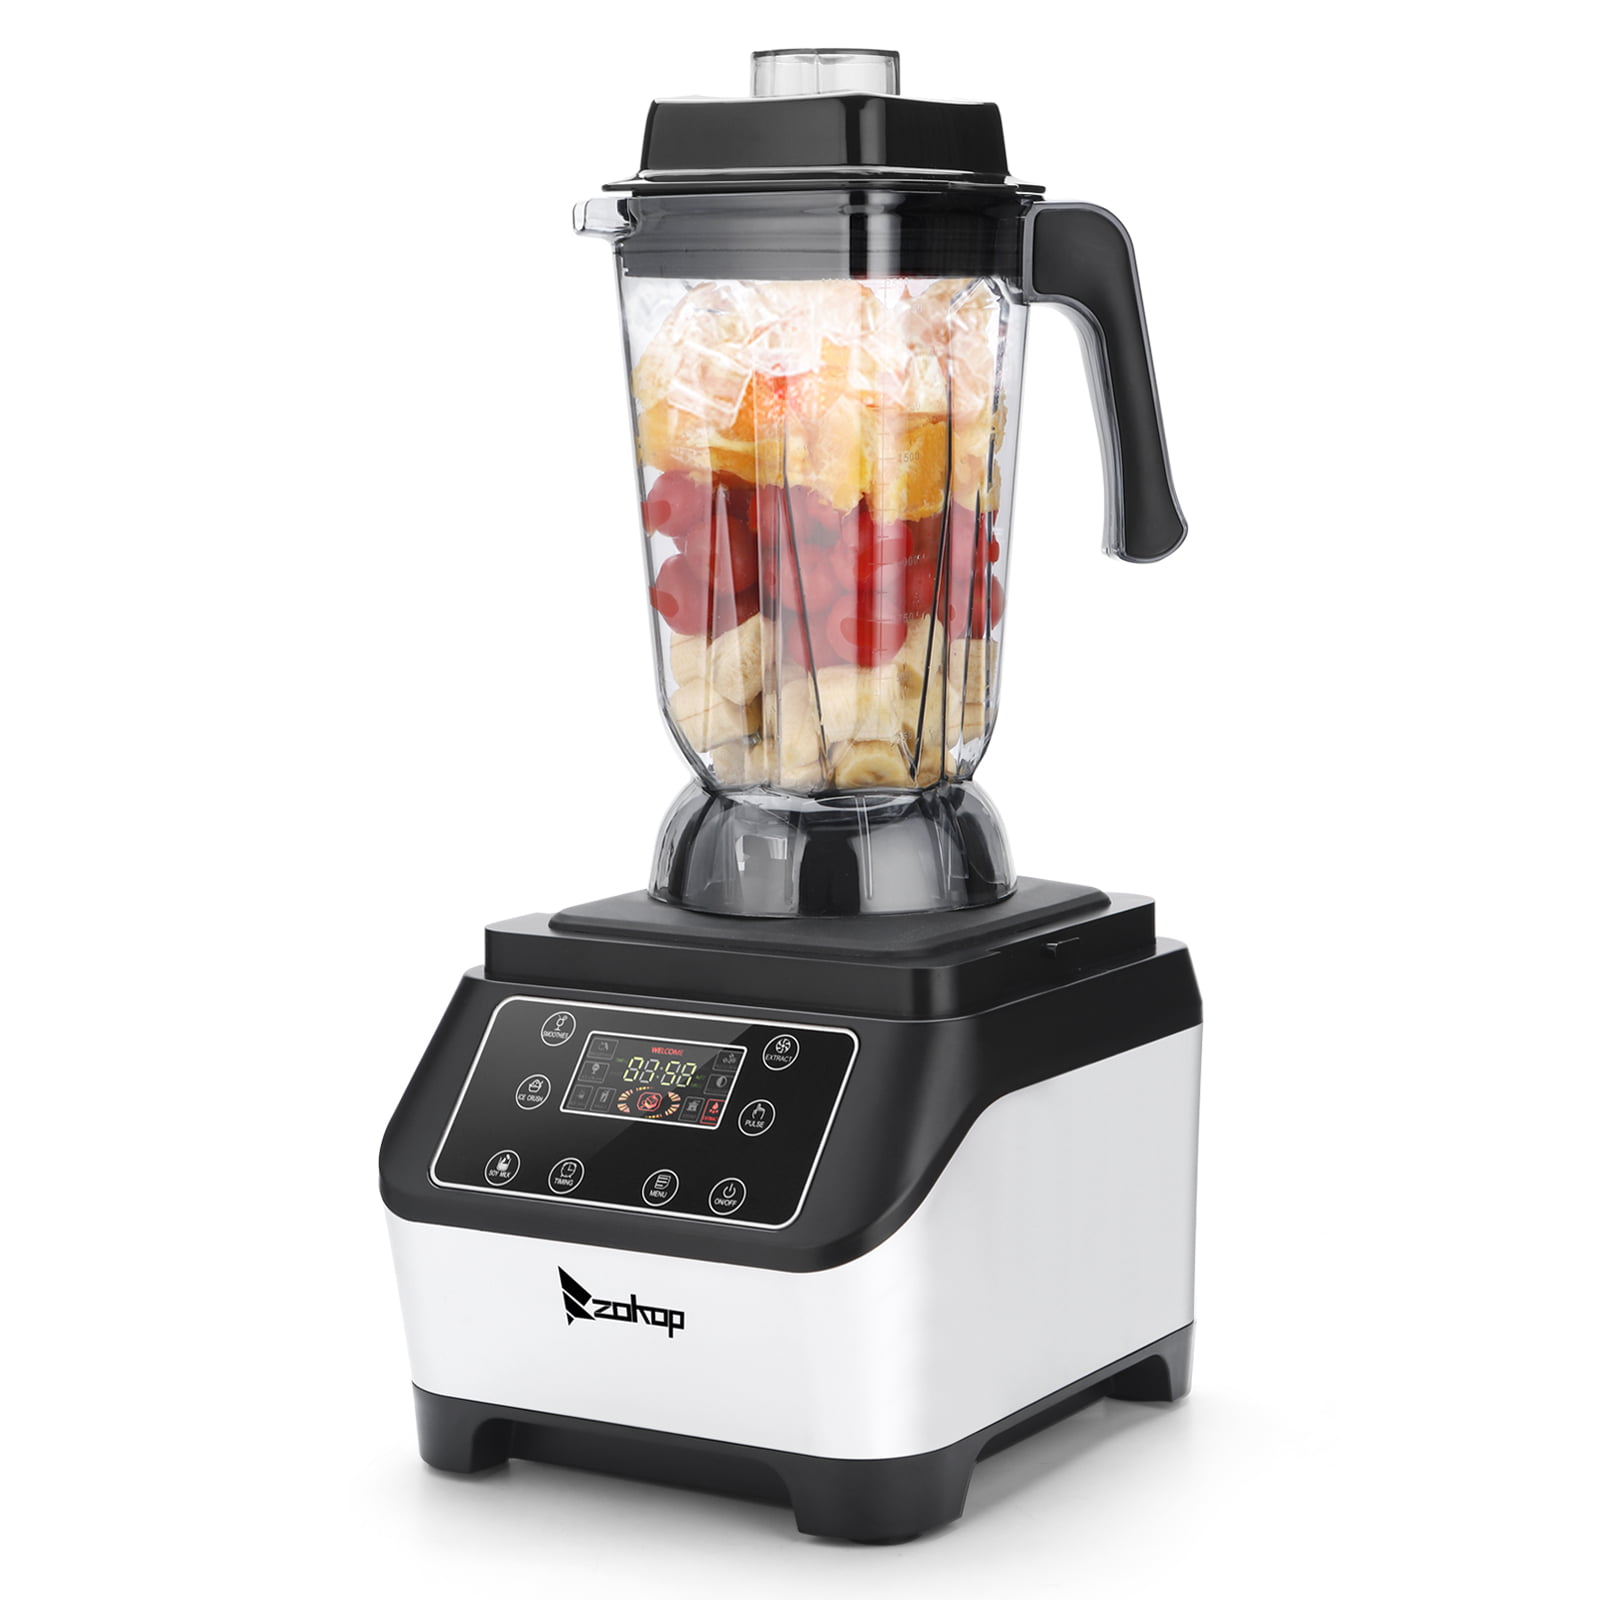 Top Rated Blender Best Smoothie Blender that Crushes Ice  Farberware  10-Speed Blender with Preprogrammed Settings BL3000FBS